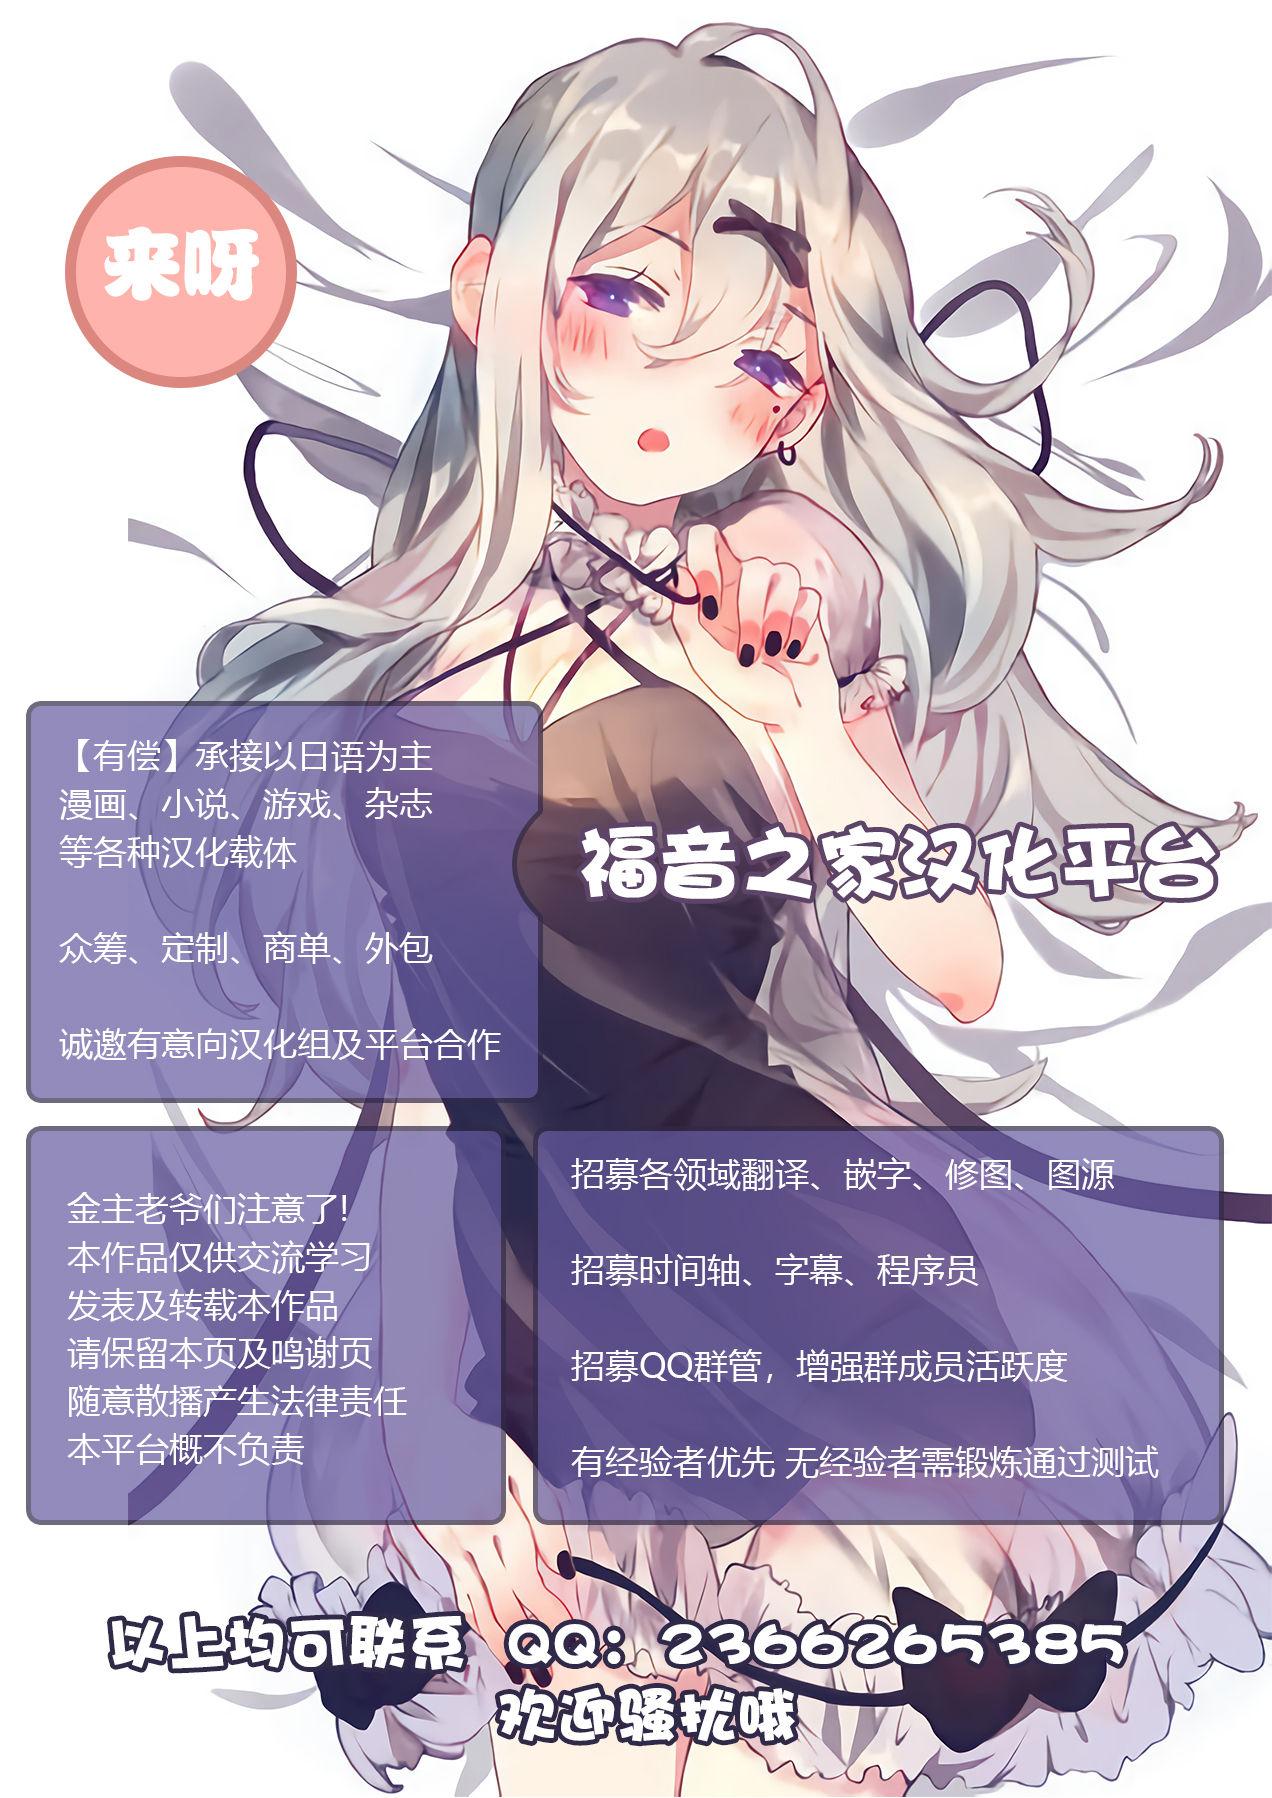 COMIC Unreal Transforming Into Another Person and Spoofing Temptation Vol.1 [Digital][Chinese]【不可视汉化】 74